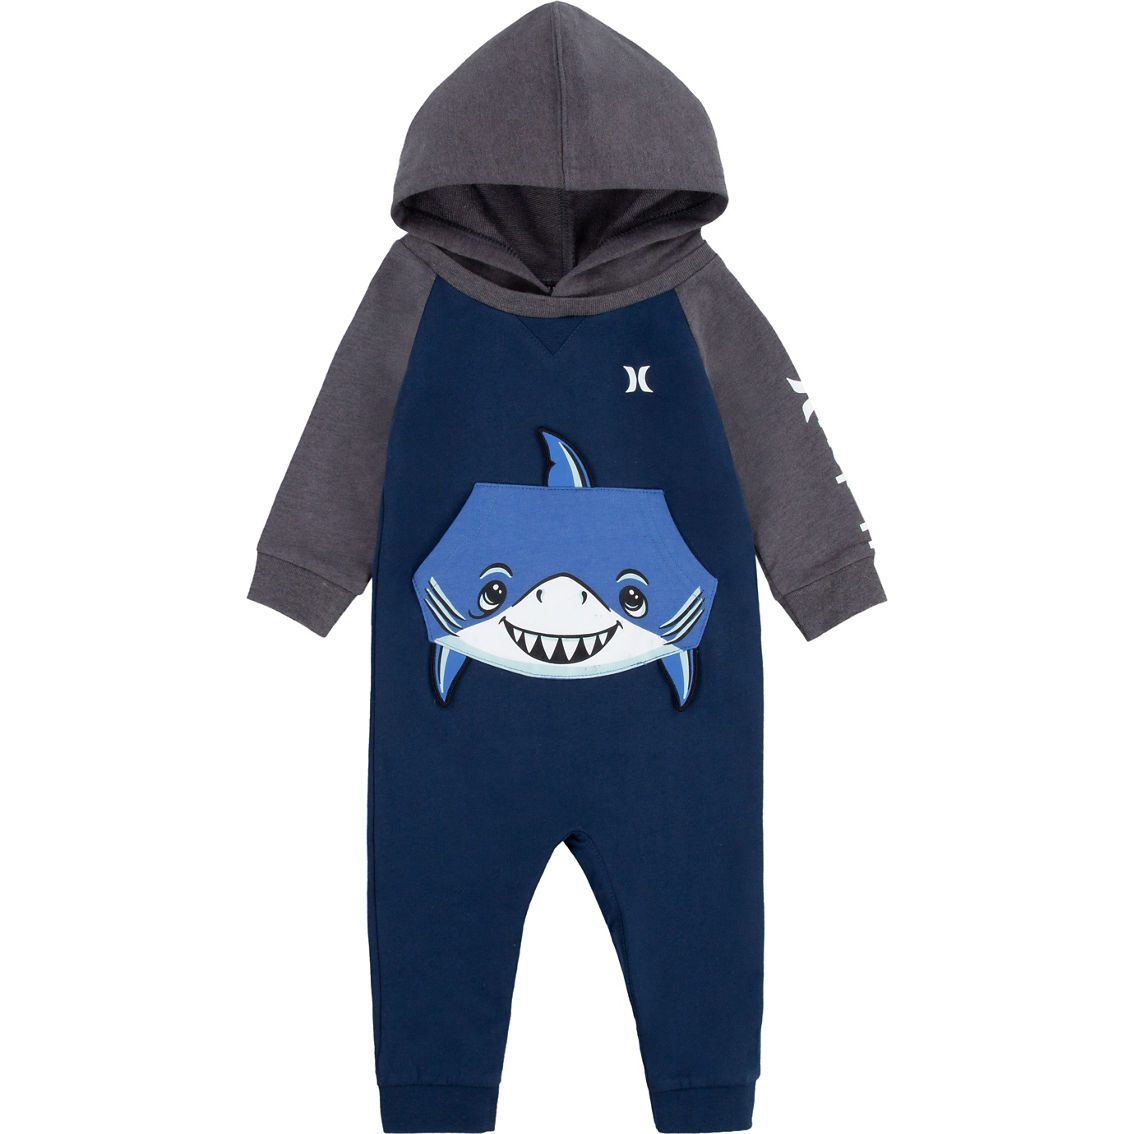 Hurley Boys Shark Hooded Coverall | Baby Boy 0-24 Months | Clothing ...